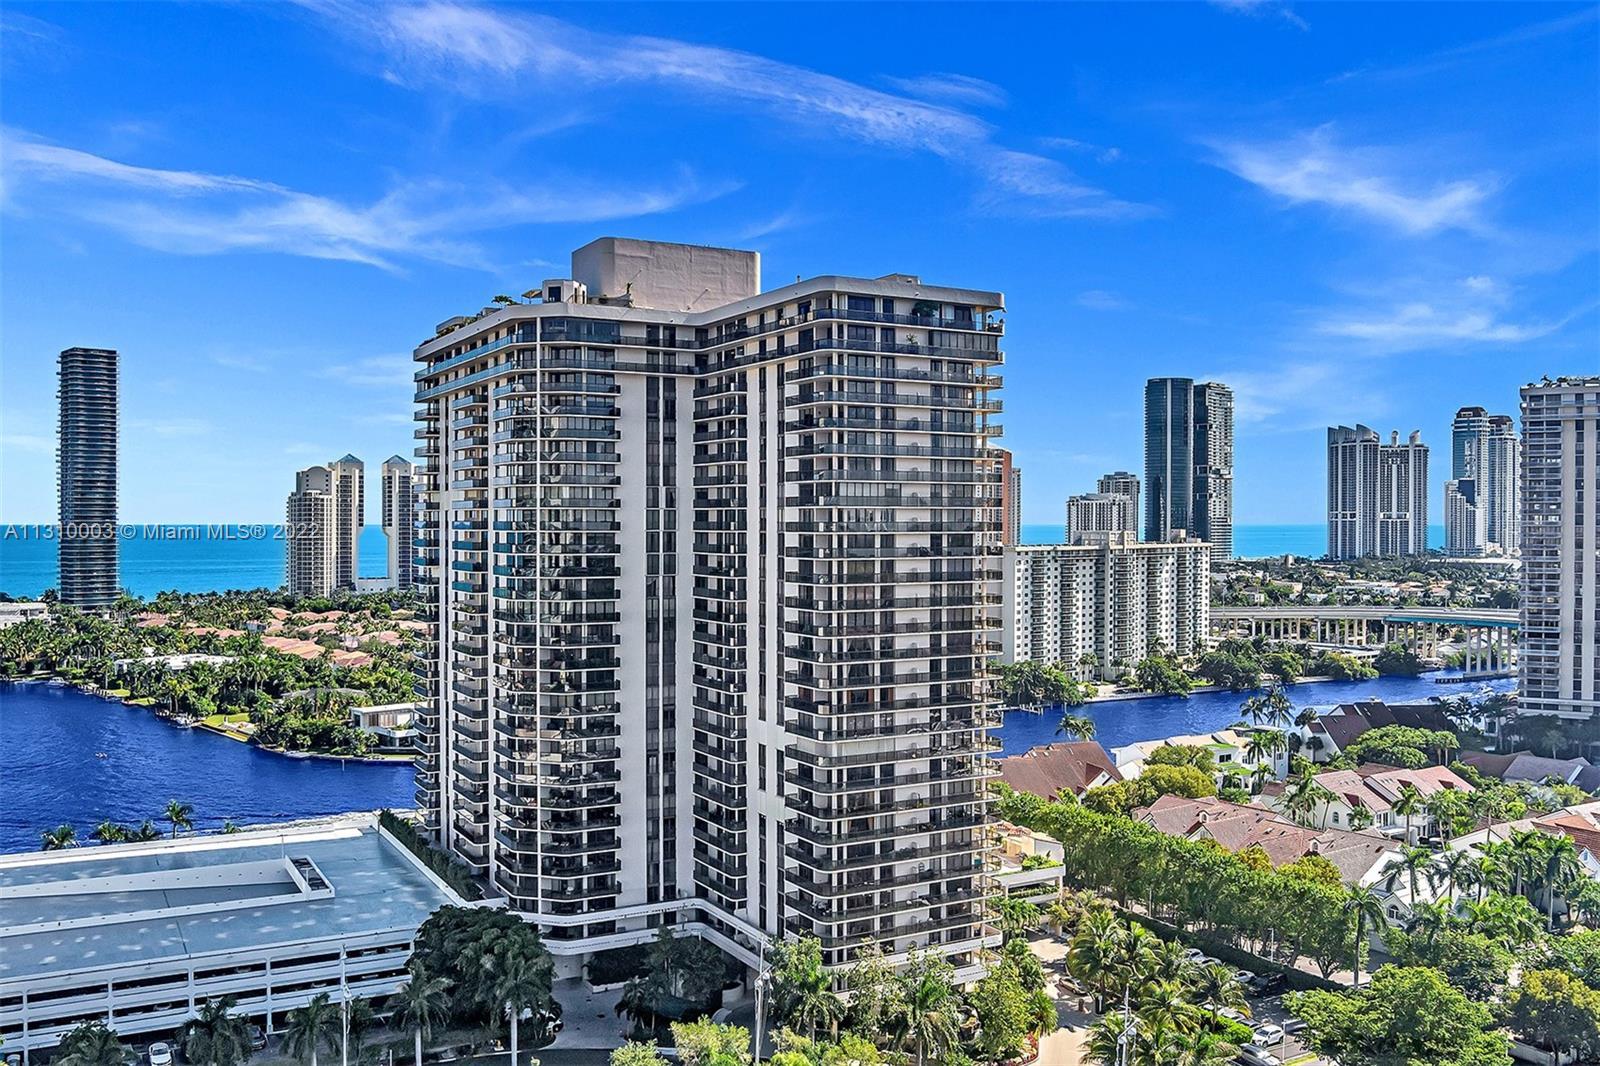 Beautiful corner unit in Turnberry Isle's South Tower with wrap around balcony overlooking the marin